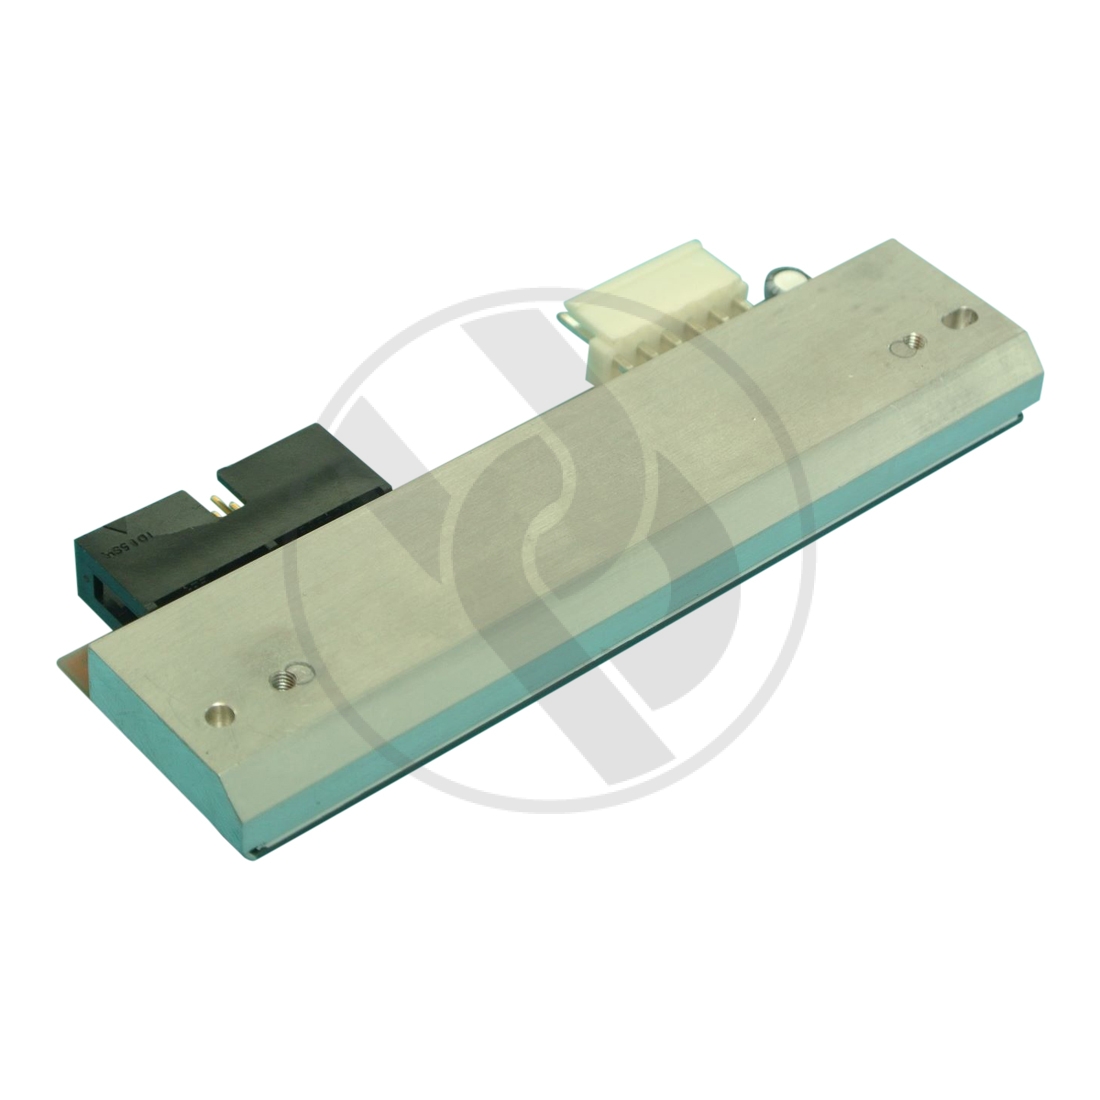 Thermal printhead, 107 mm, for Zodiac/ICE